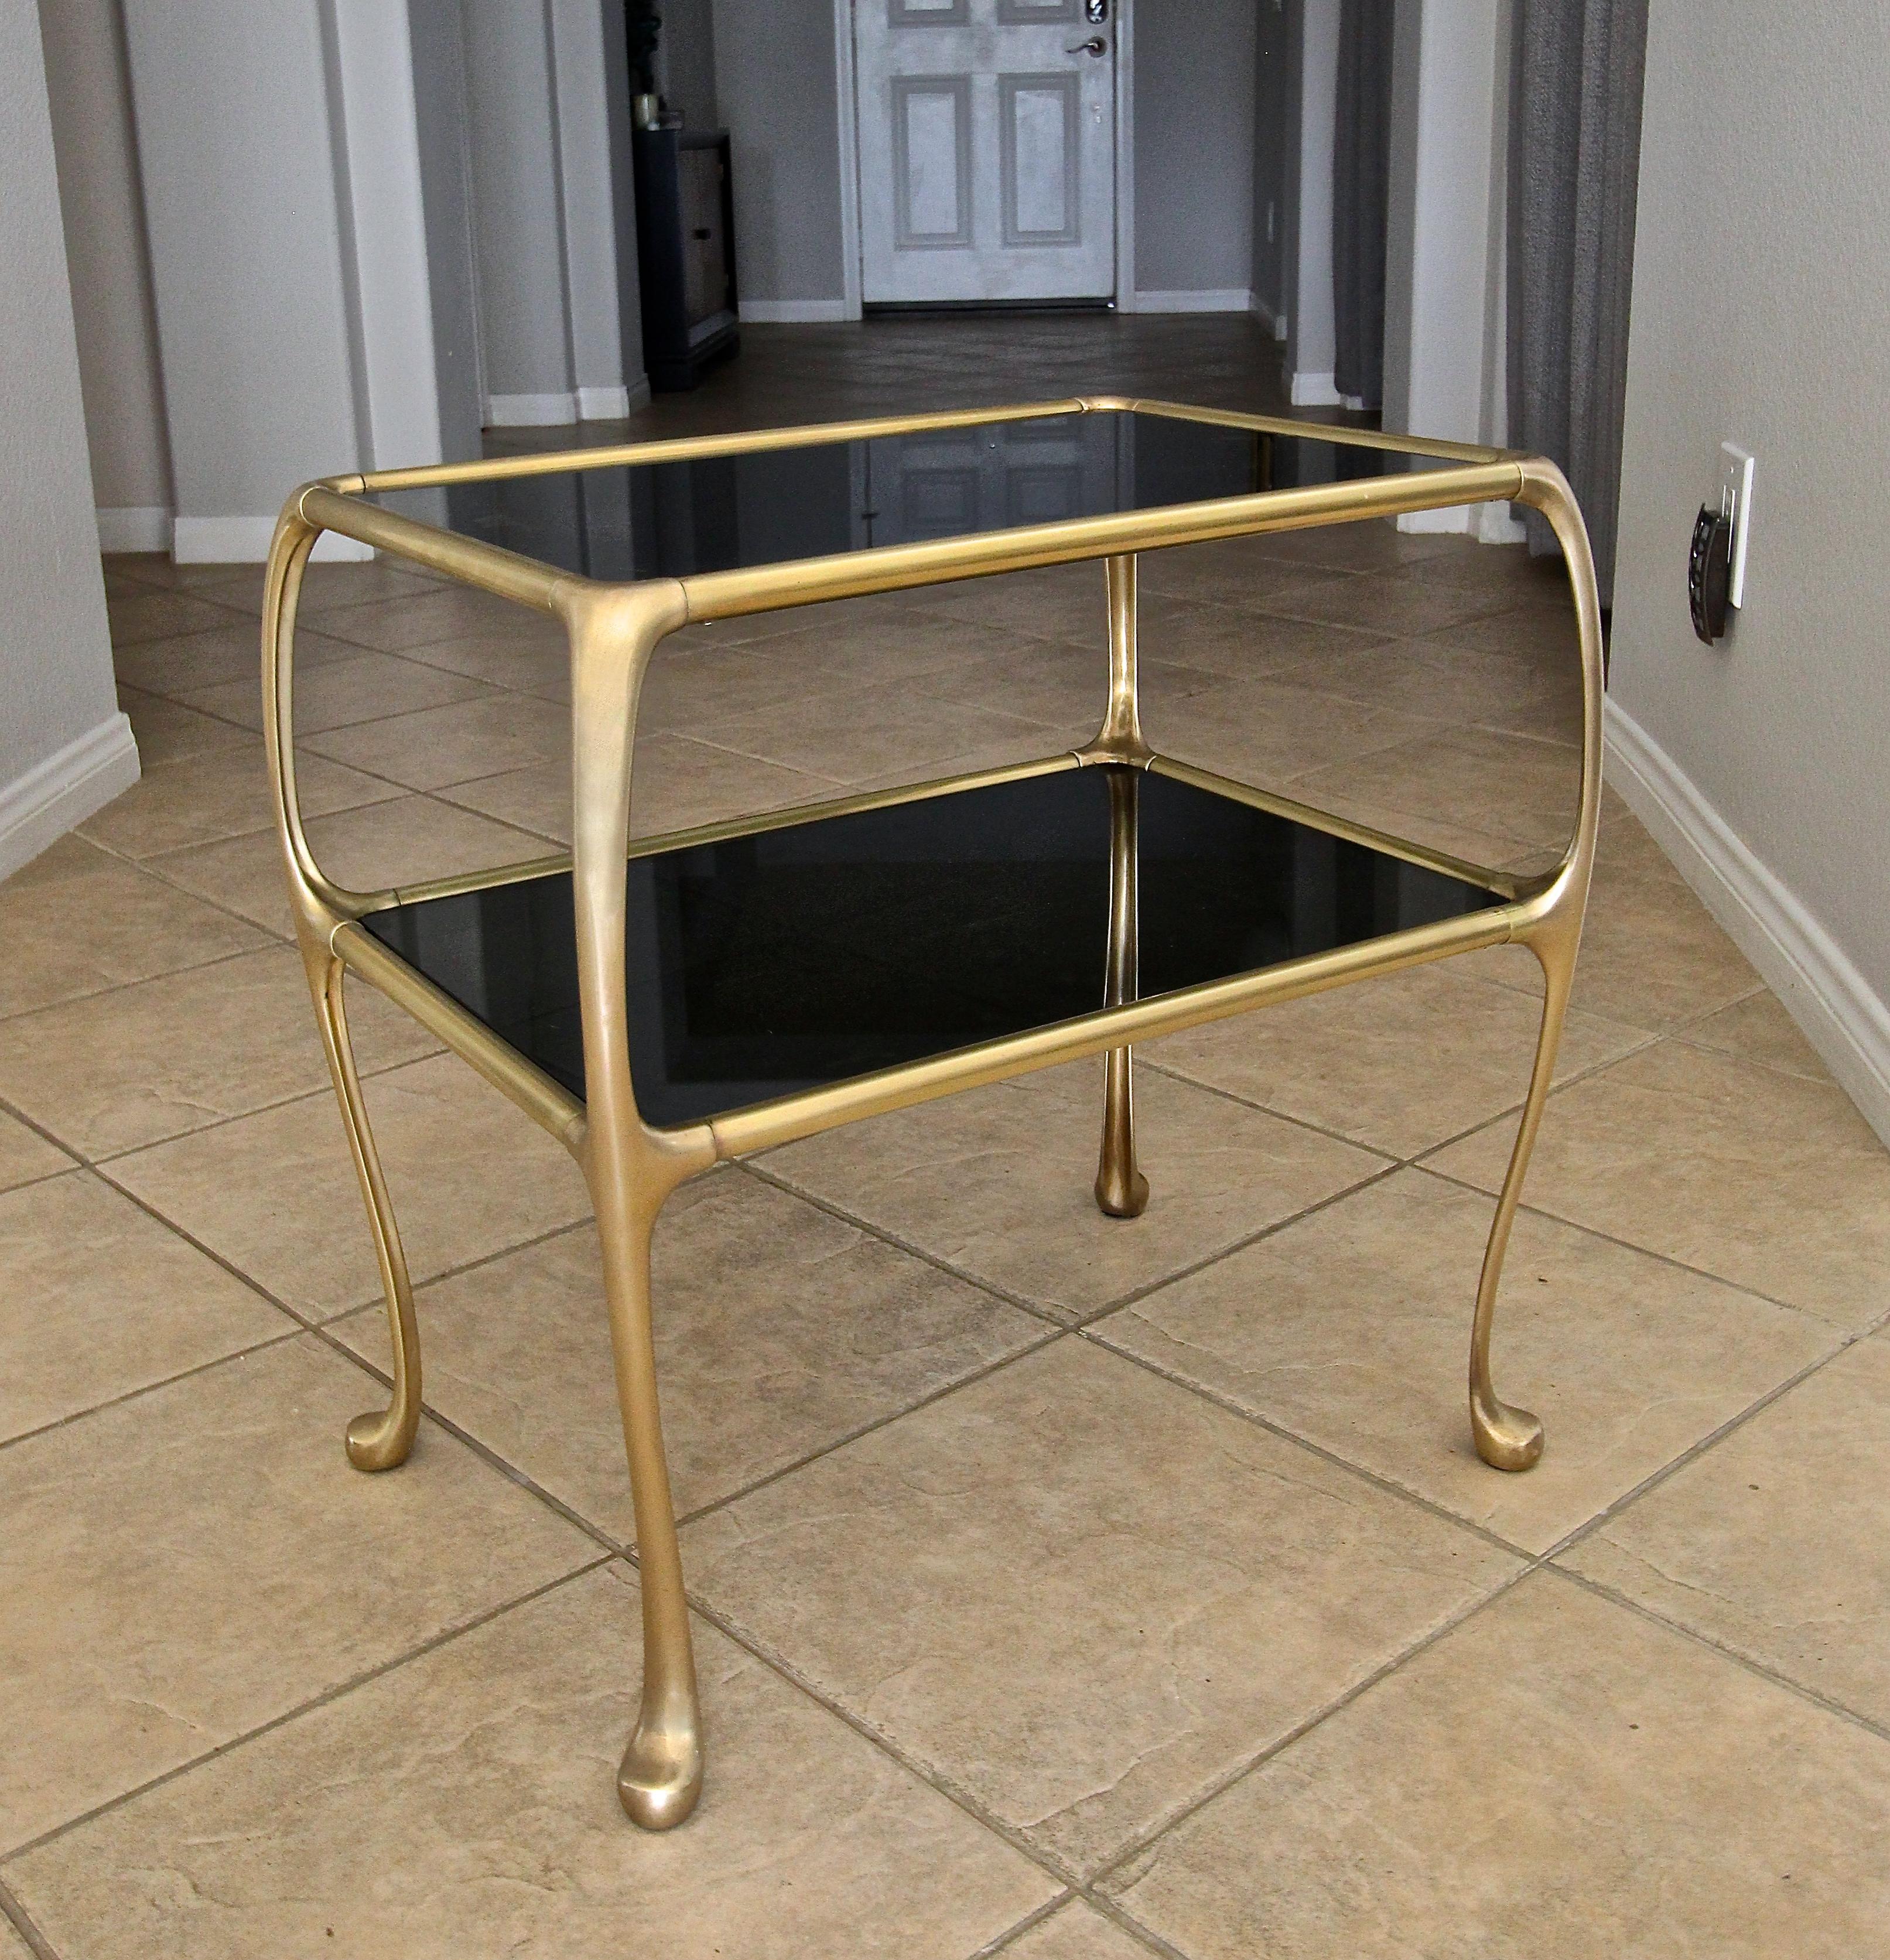 Italian brass 2-tier rectangular side or occasional end table, with newer dark tinted glass insert tops. Unique design with bowed cabriole style legs. Solid heavy brass construction.